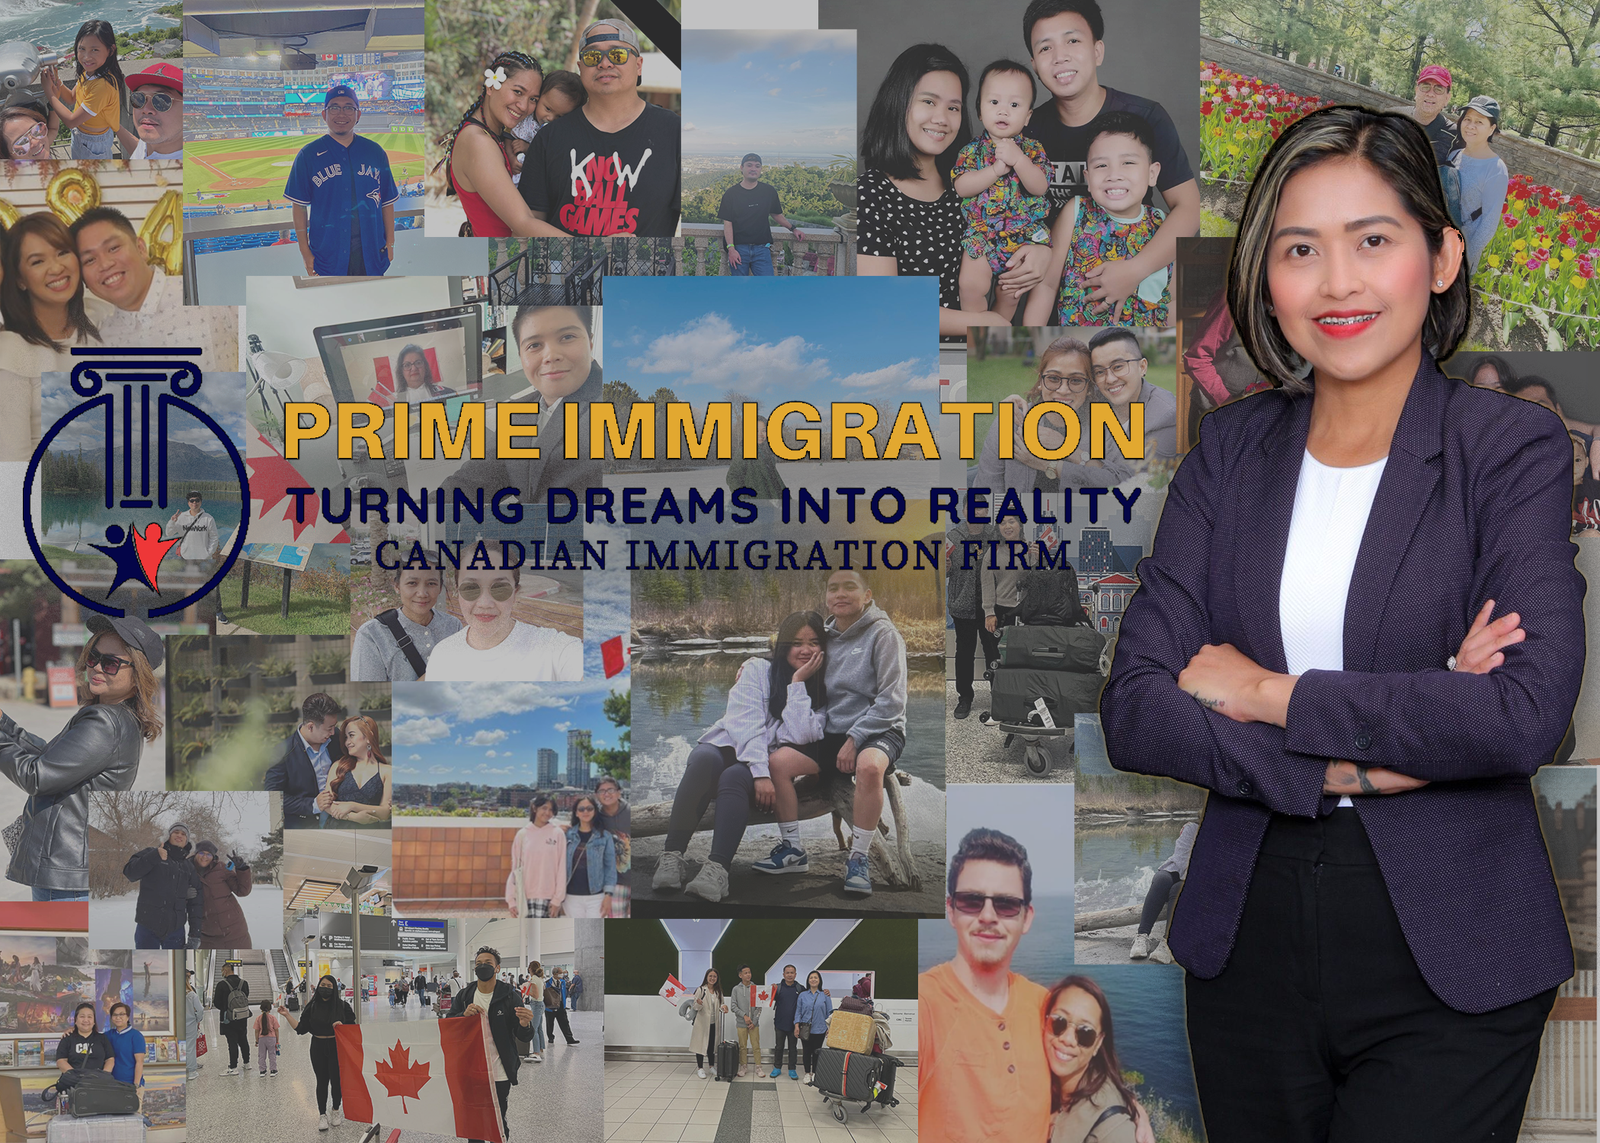 Our Immigration Firm